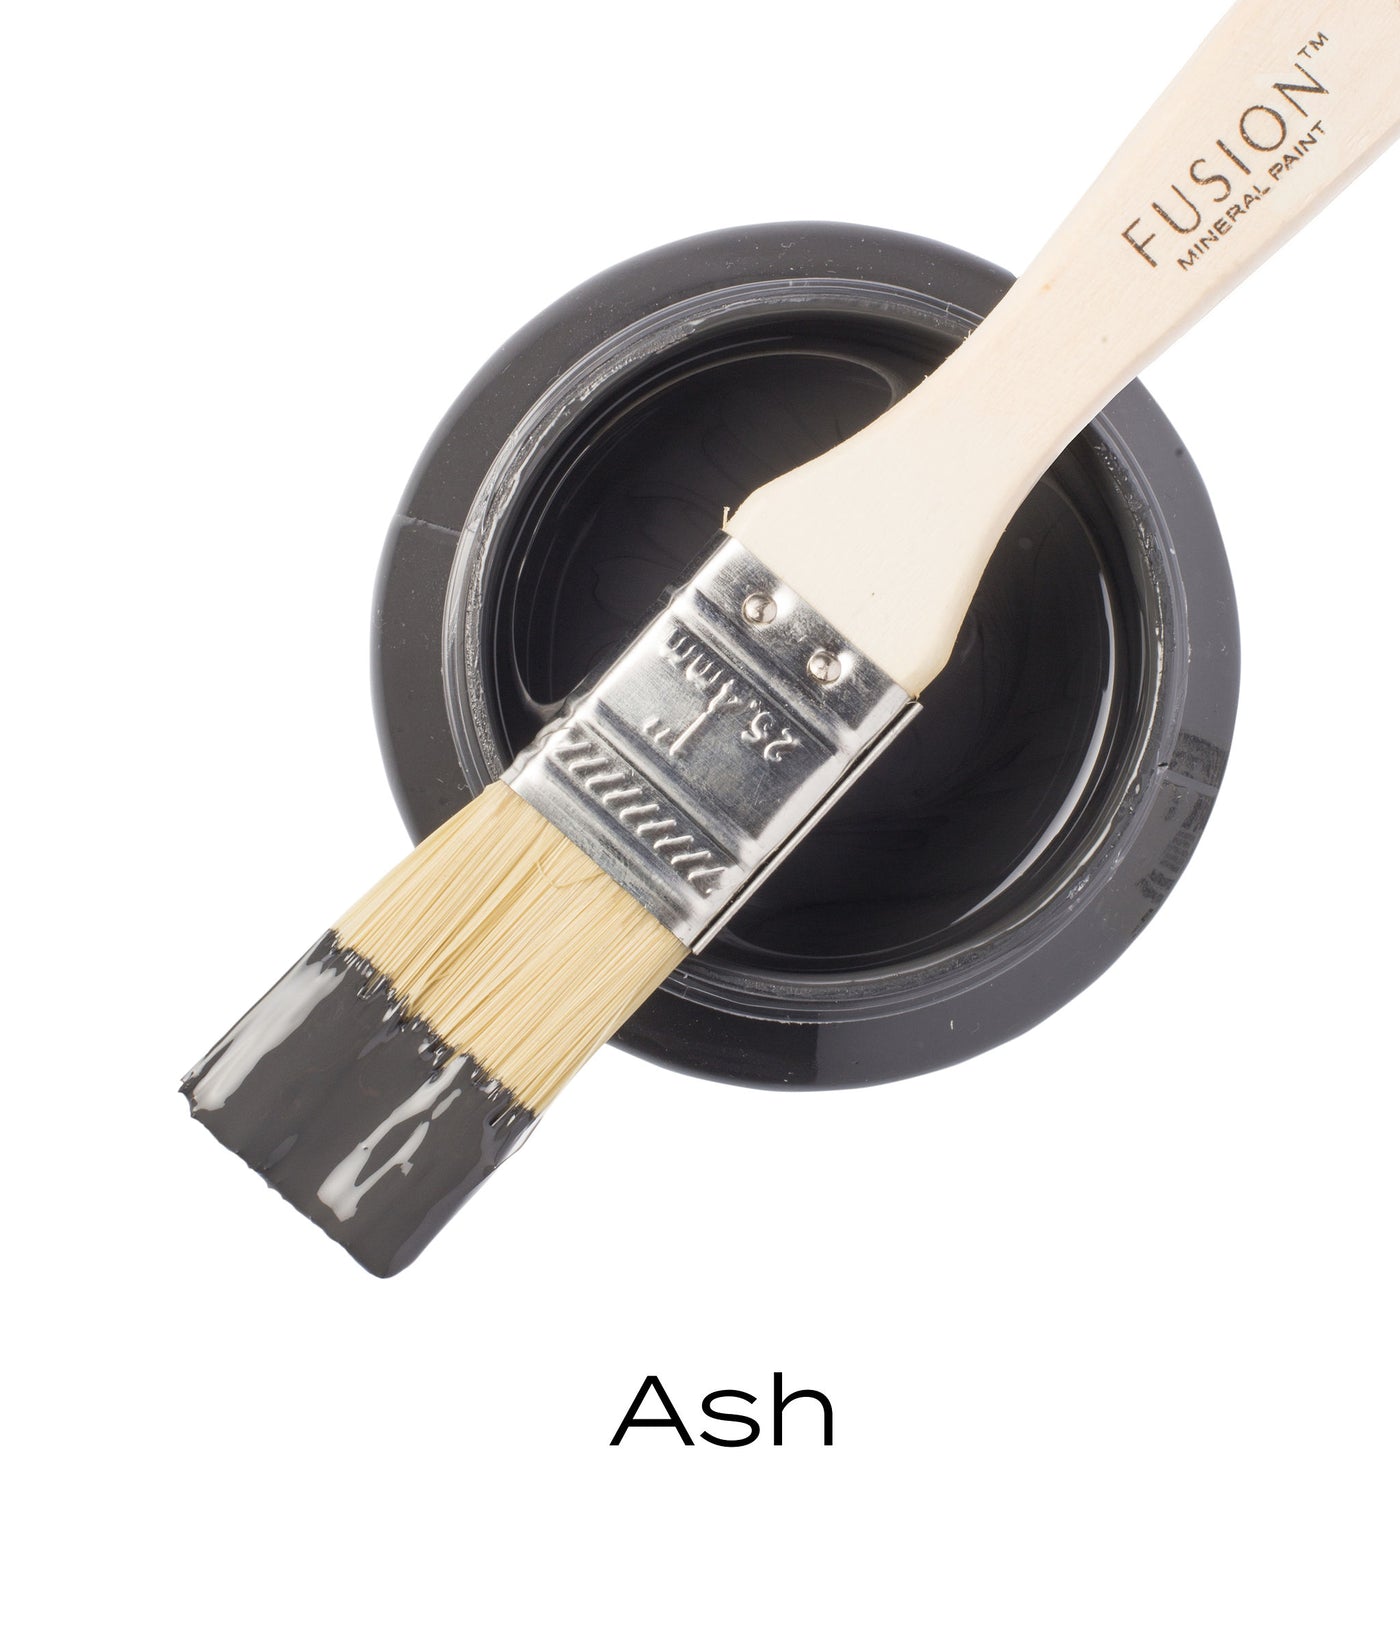 Fusion Mineral Paint - BRUSH CLEANER A must have in every painter's kit!  This natural linseed oil based brush cleaner not only cleans the paint out  of your brushes, it also conditions